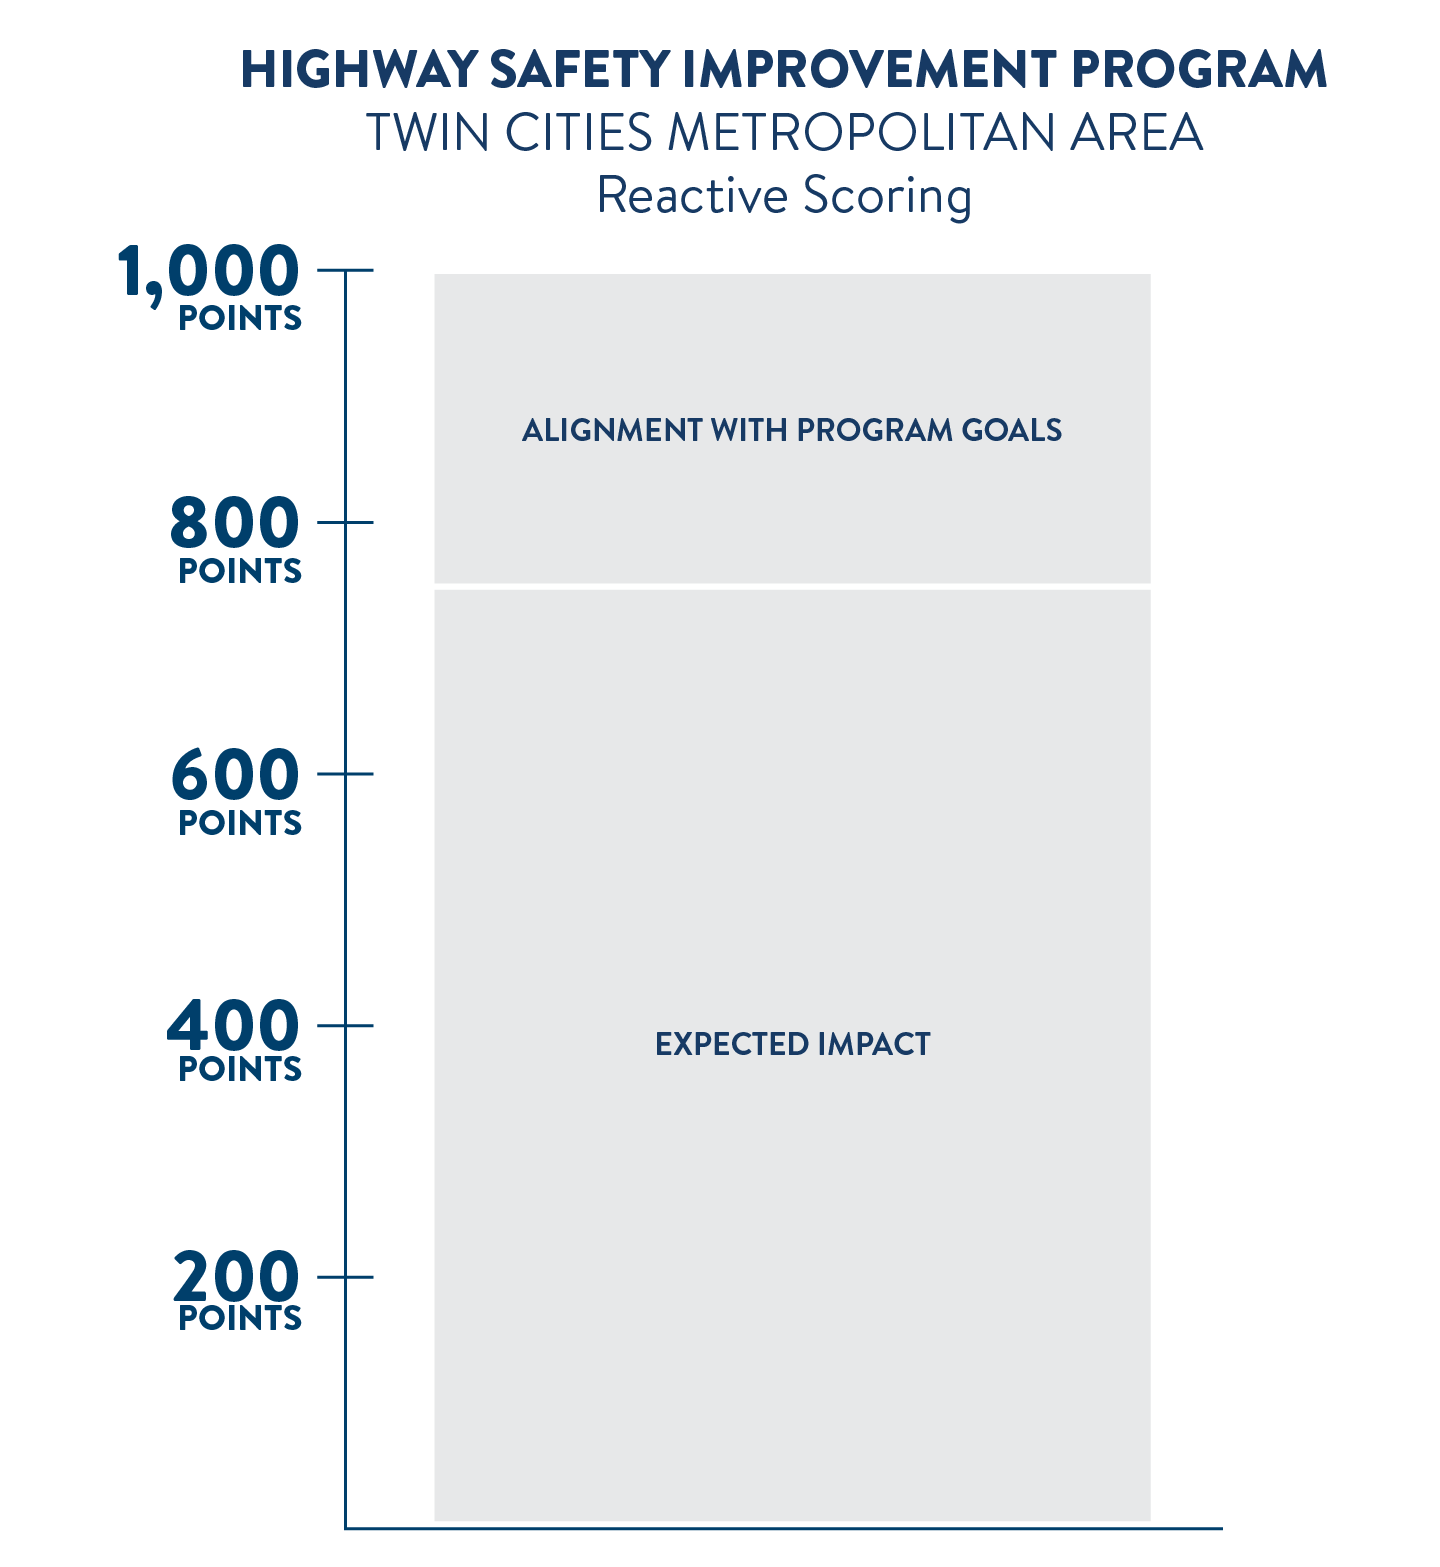 Scoring criteria for reactive safety projects in the Highway Safety Improvement Program in the Minneapolis-St. Paul metropolitan area. Out of 1,000 possible points, 750 points are based on the expected impact of the project and 250 are based on alignment with program goals.